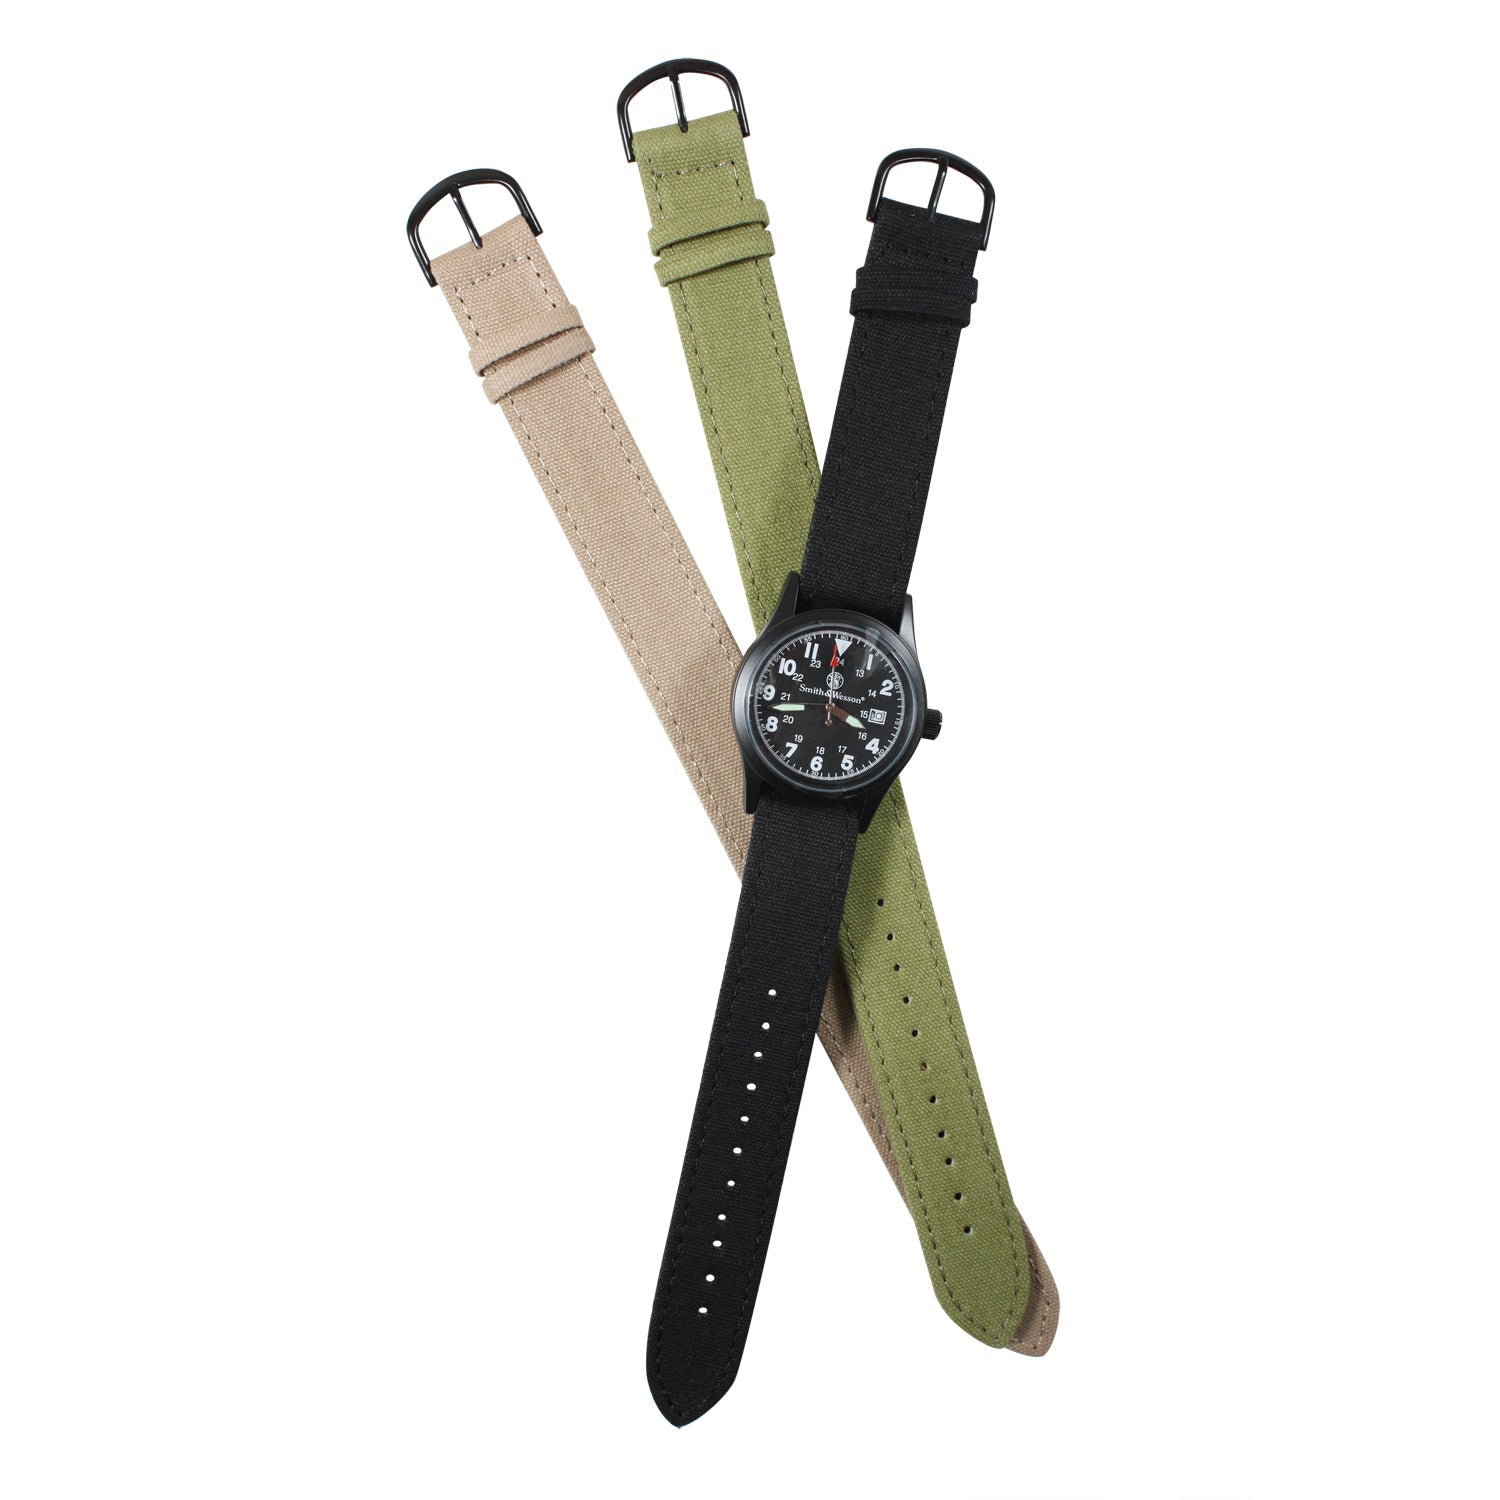 The Smith & Wesson Military Watch Set is the most stylish and sturdy watch for those in the military or law enforcement sector, or anyone seeking an adventure, sport, or any daily rugged outdoor activity. 